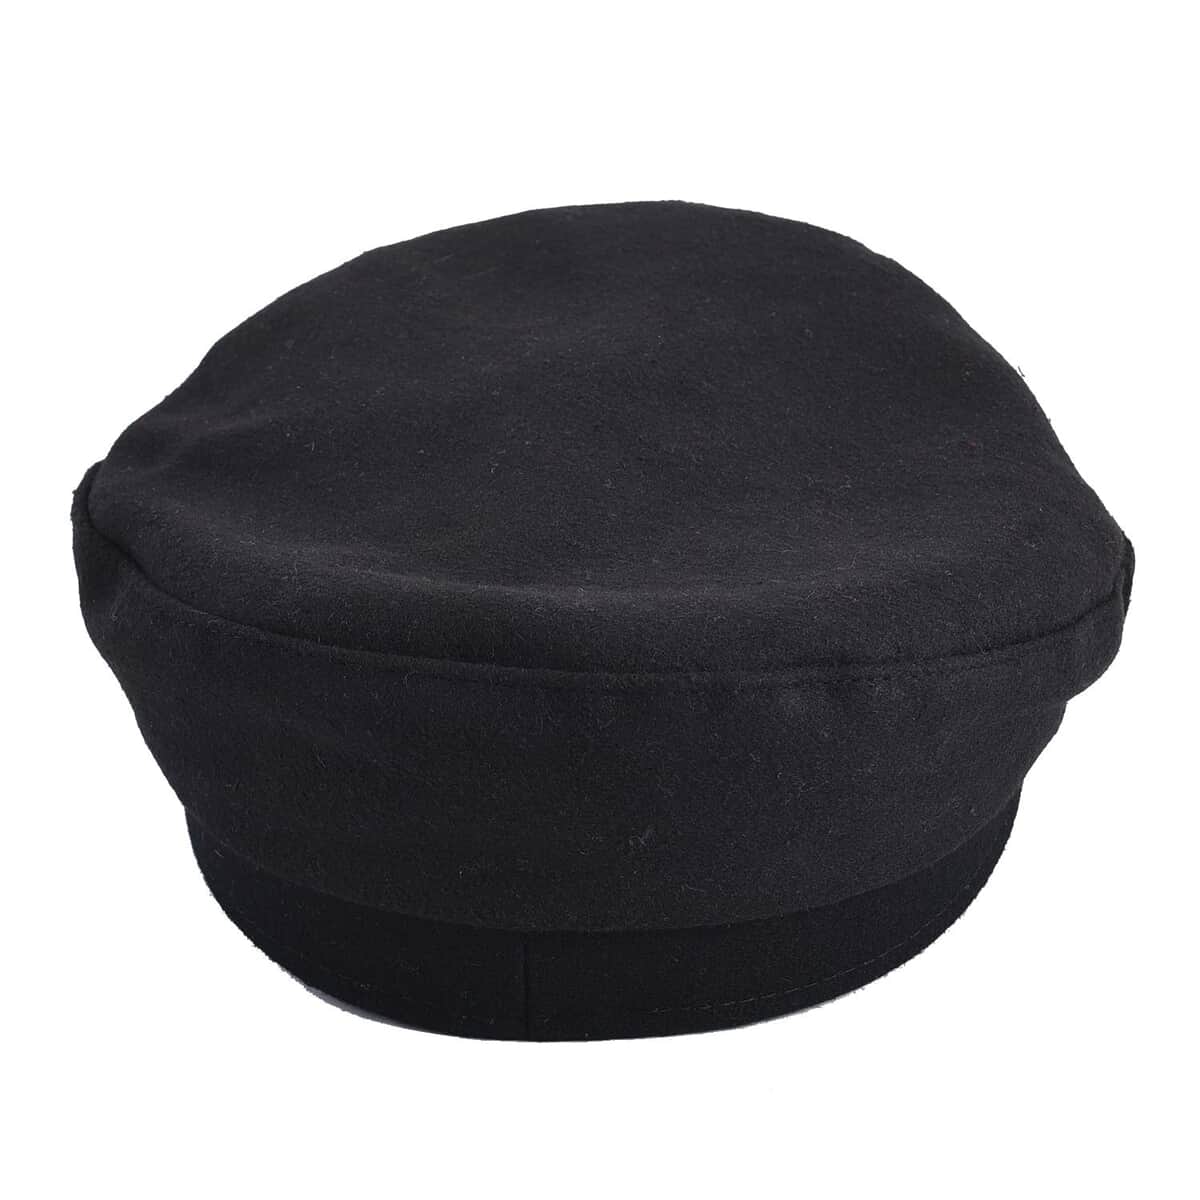 Black Fiddler Cap - (Diameter 22-23 Inches and Height -2.75 Inches) image number 2